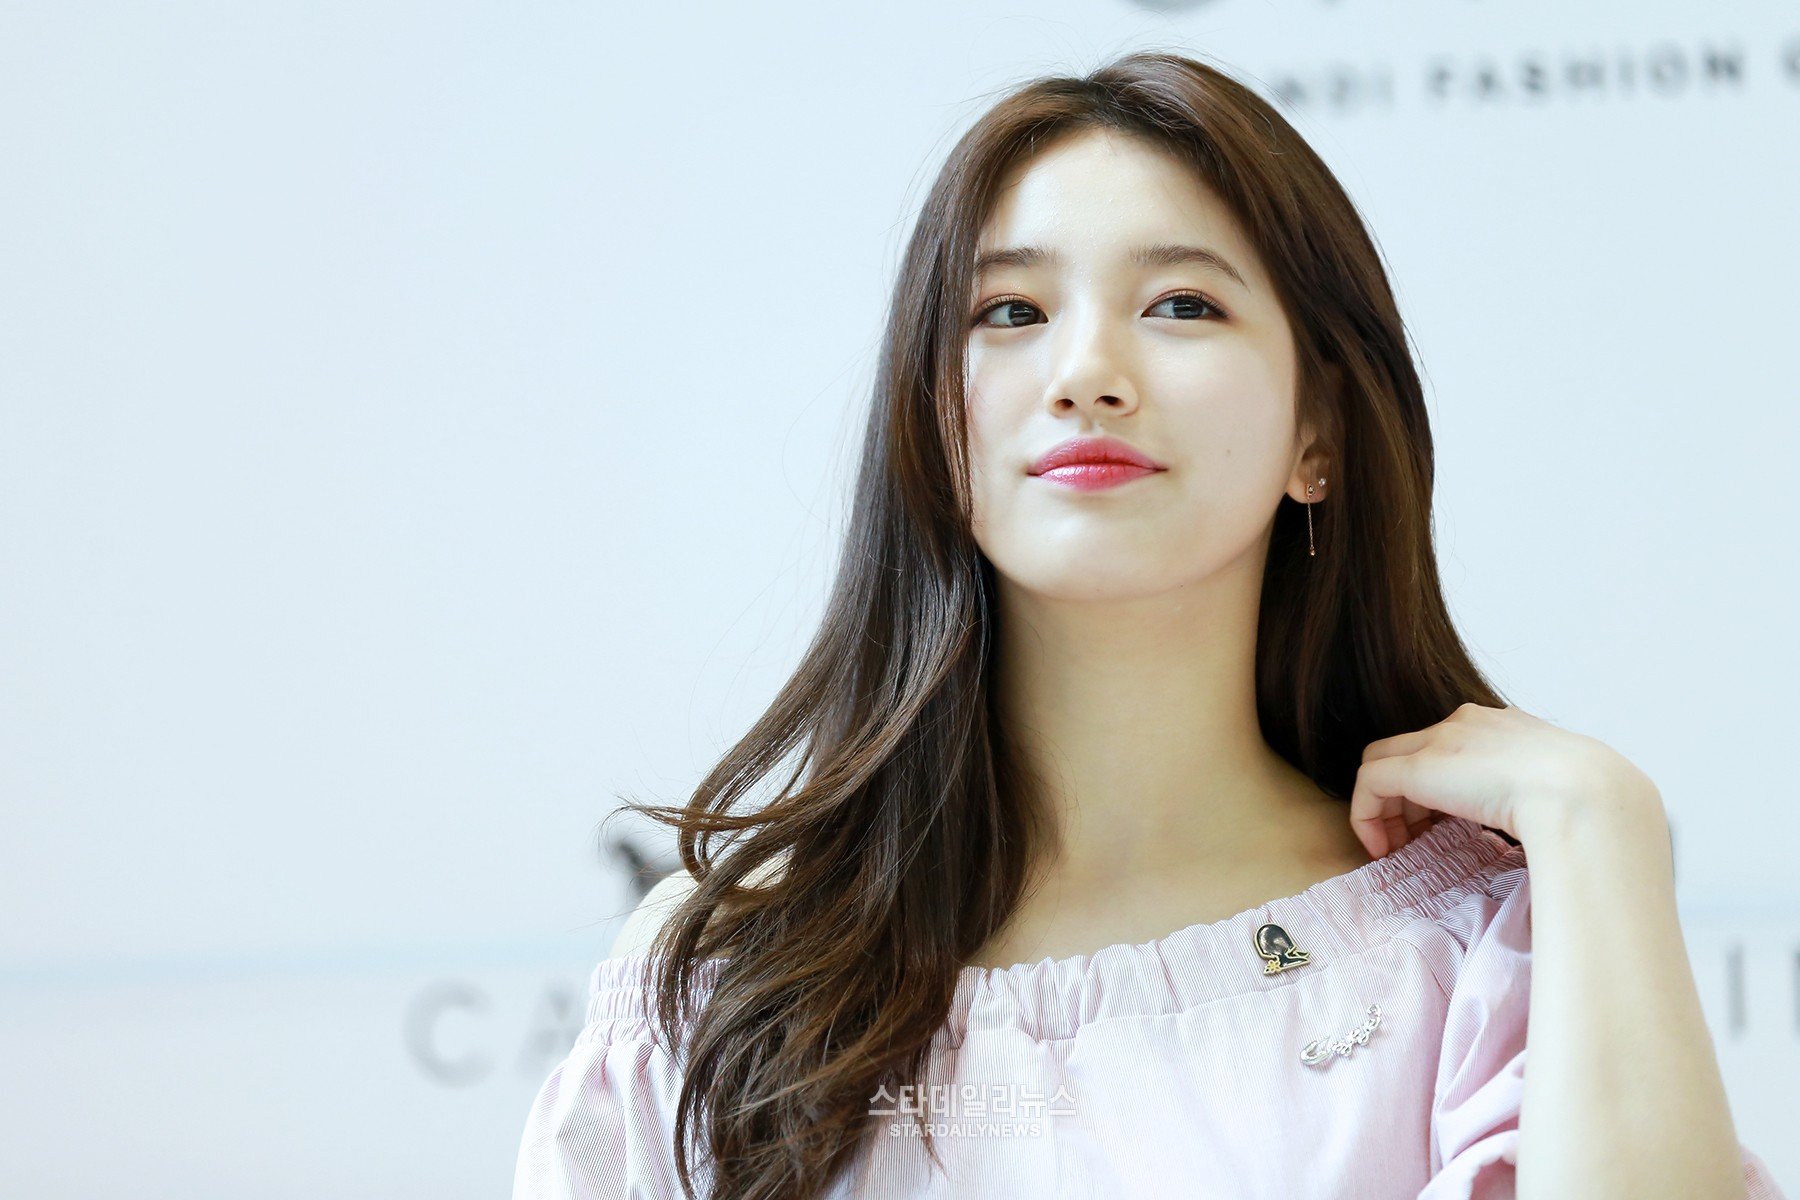 If Bae Suzy's smile can't cheer your day then something is wrong with you!